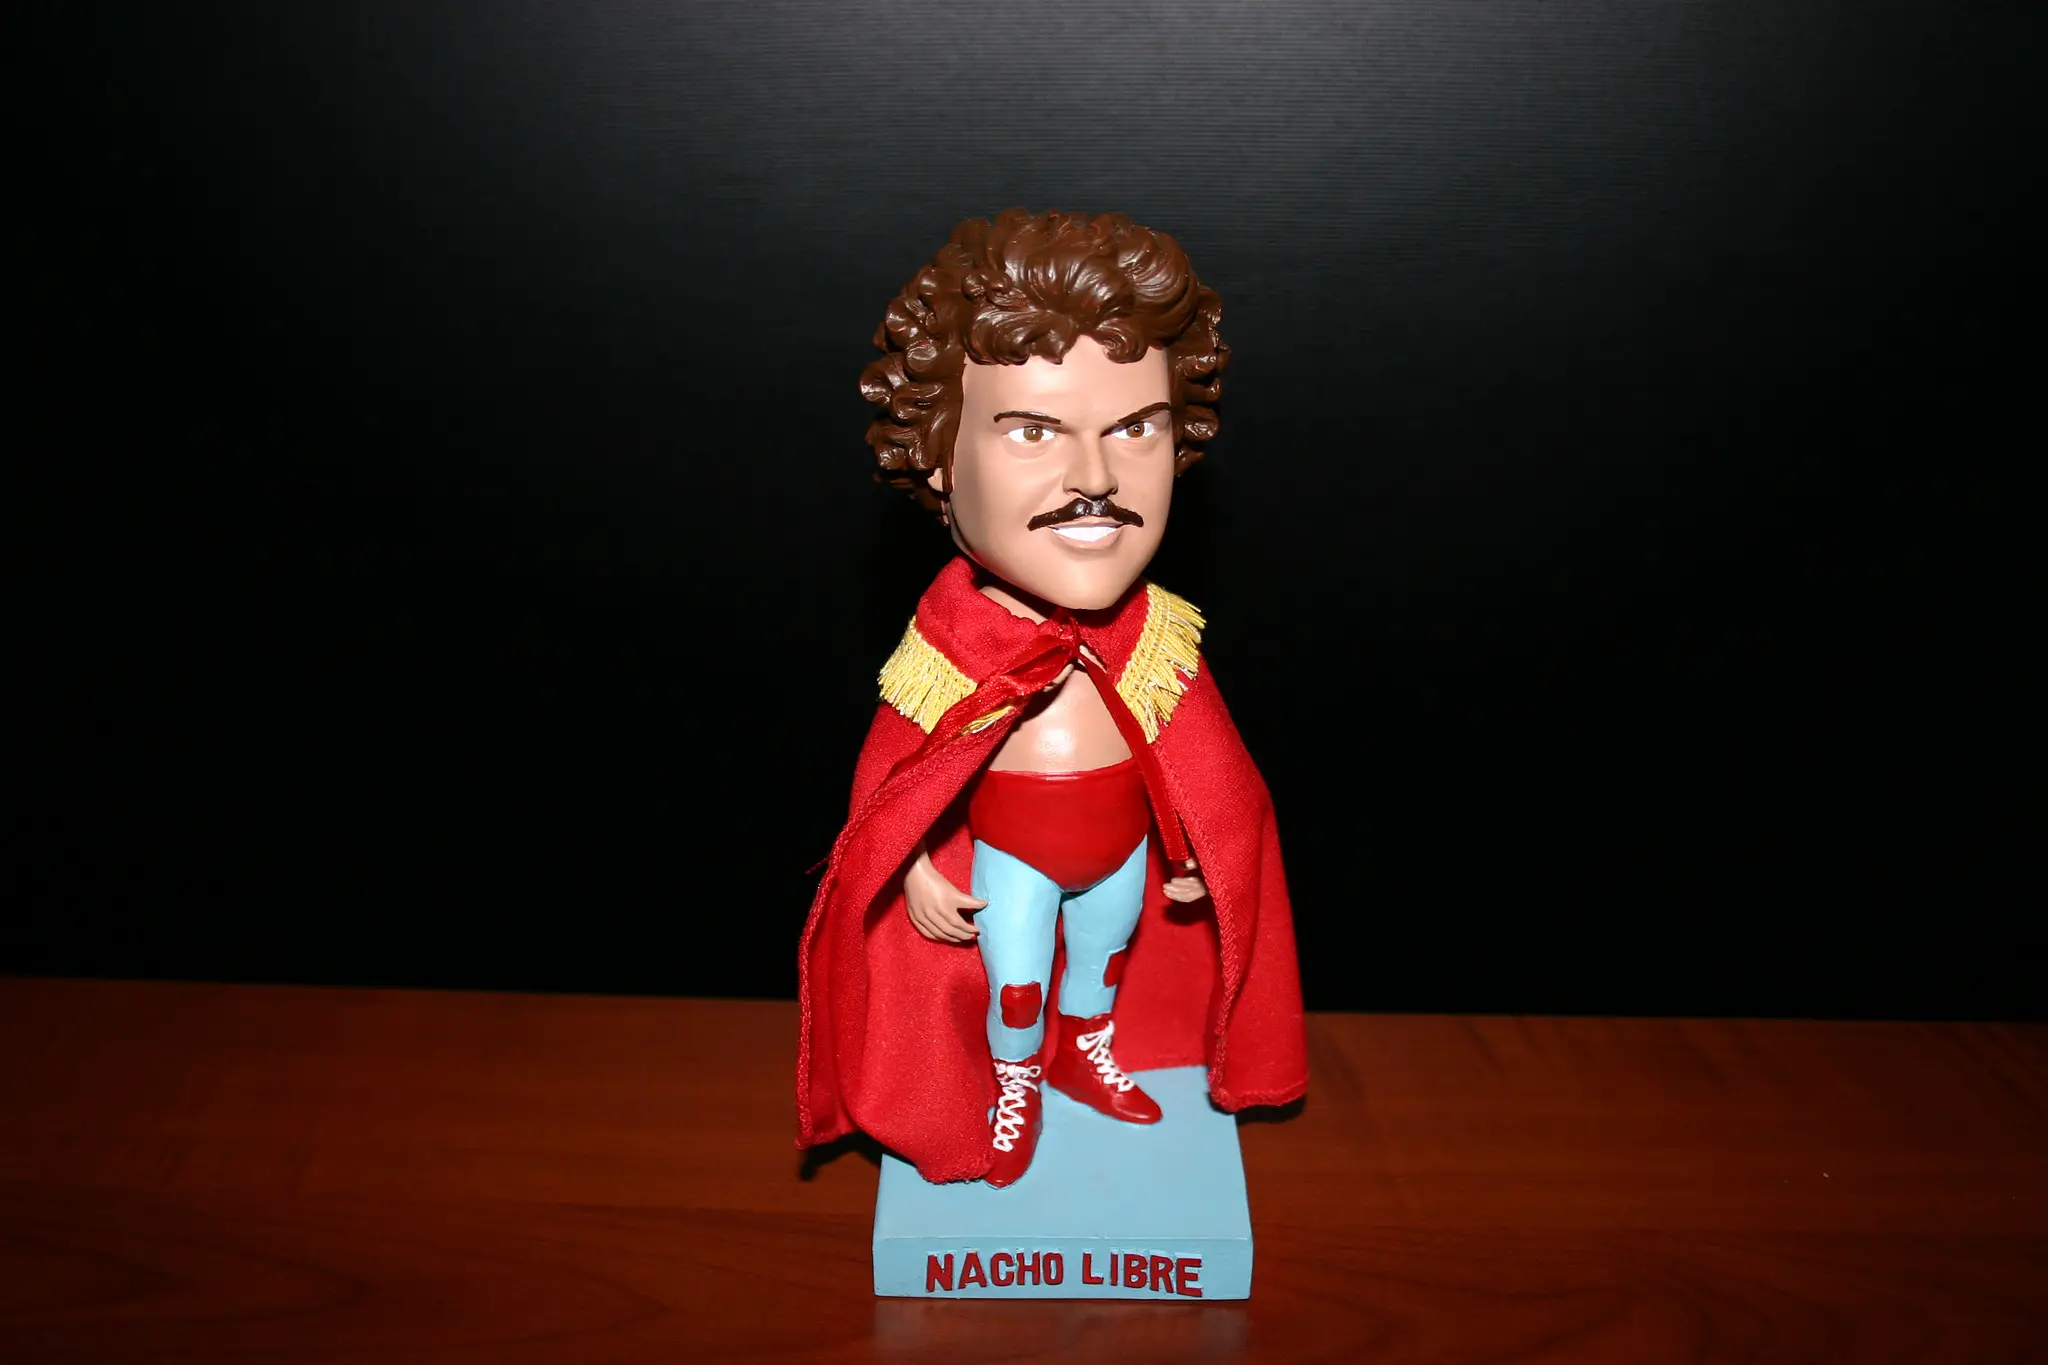 40 Funny Nacho Libre Quotes About Love & More